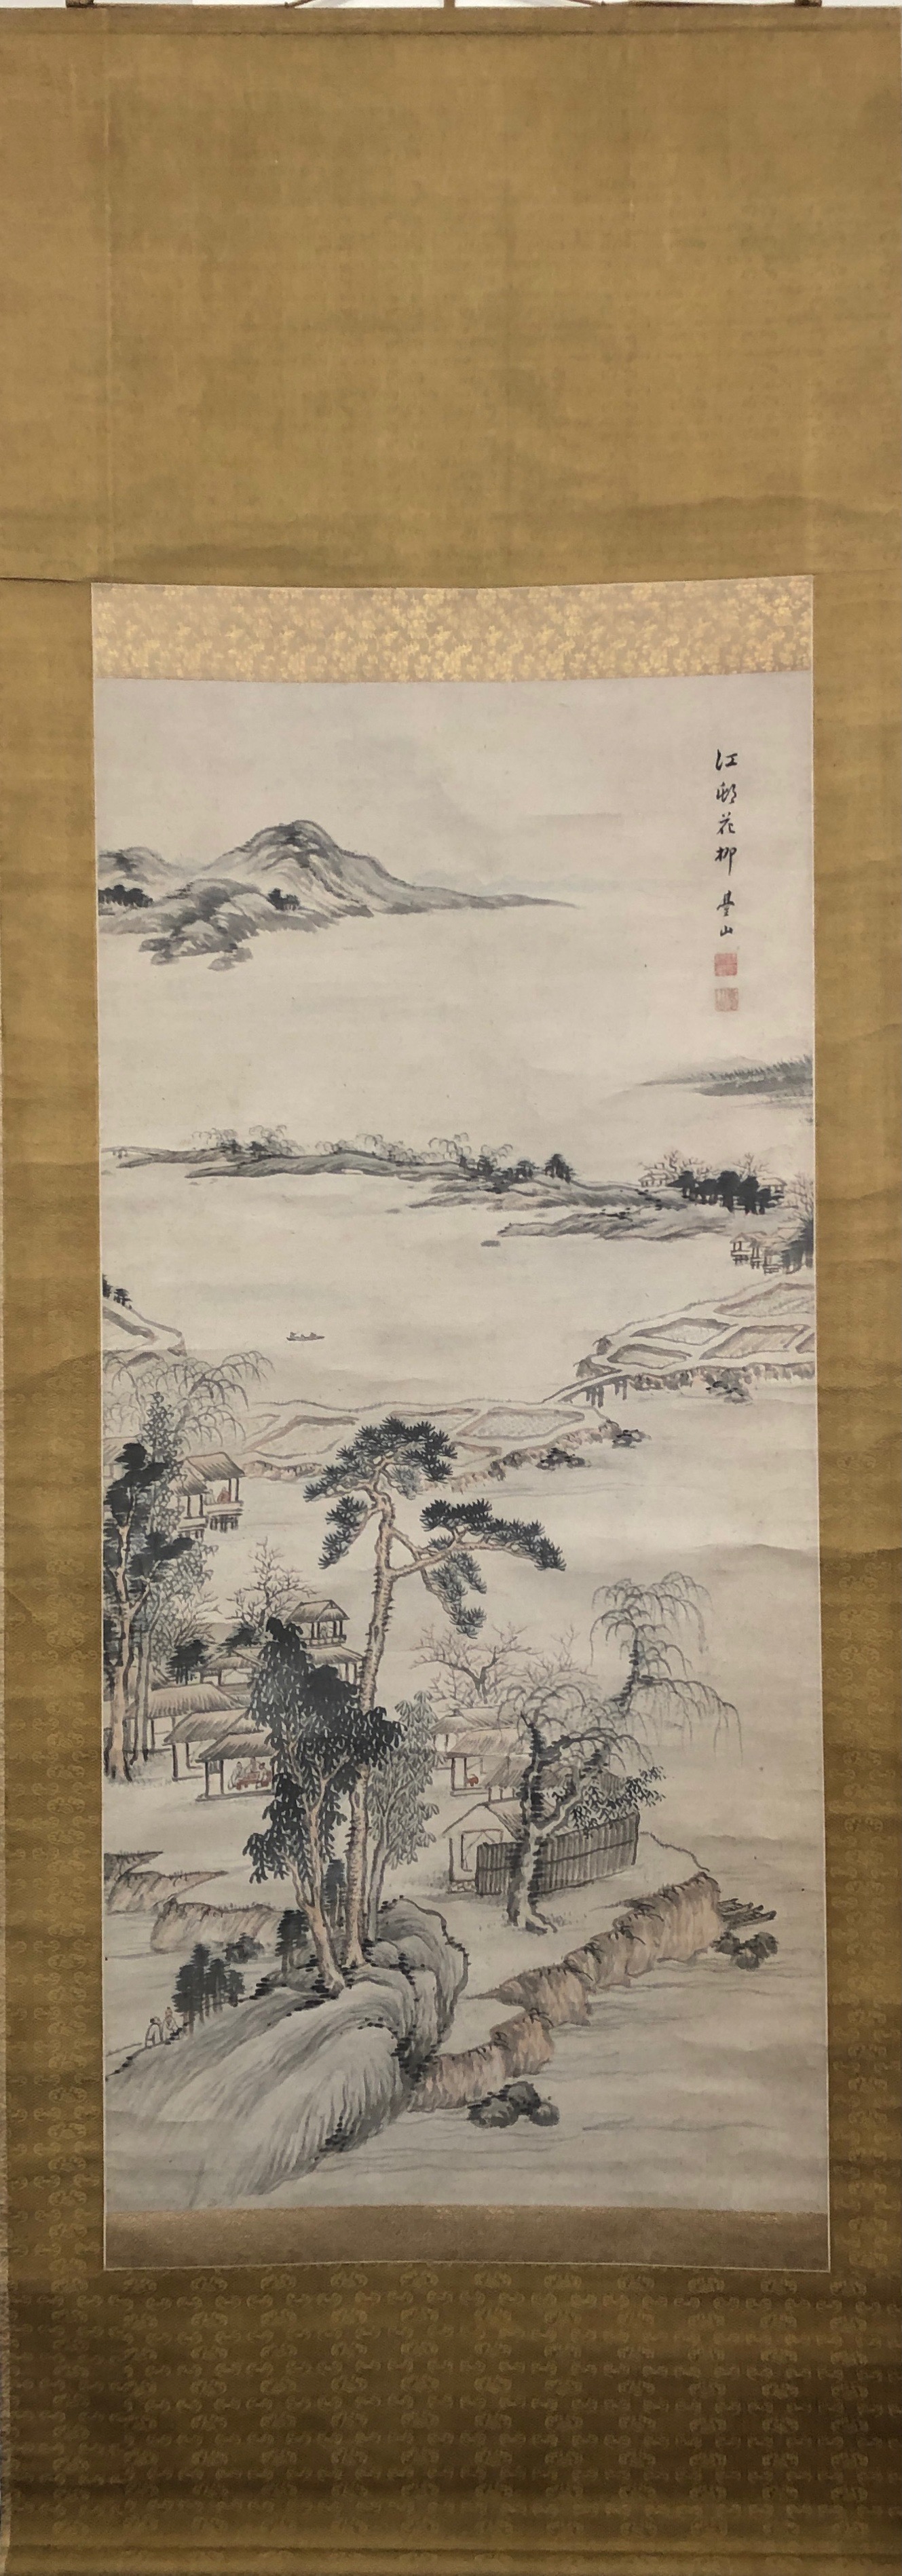 A Chinese landscape in watercolour, probably late 19th/early 20th century - Image 2 of 3